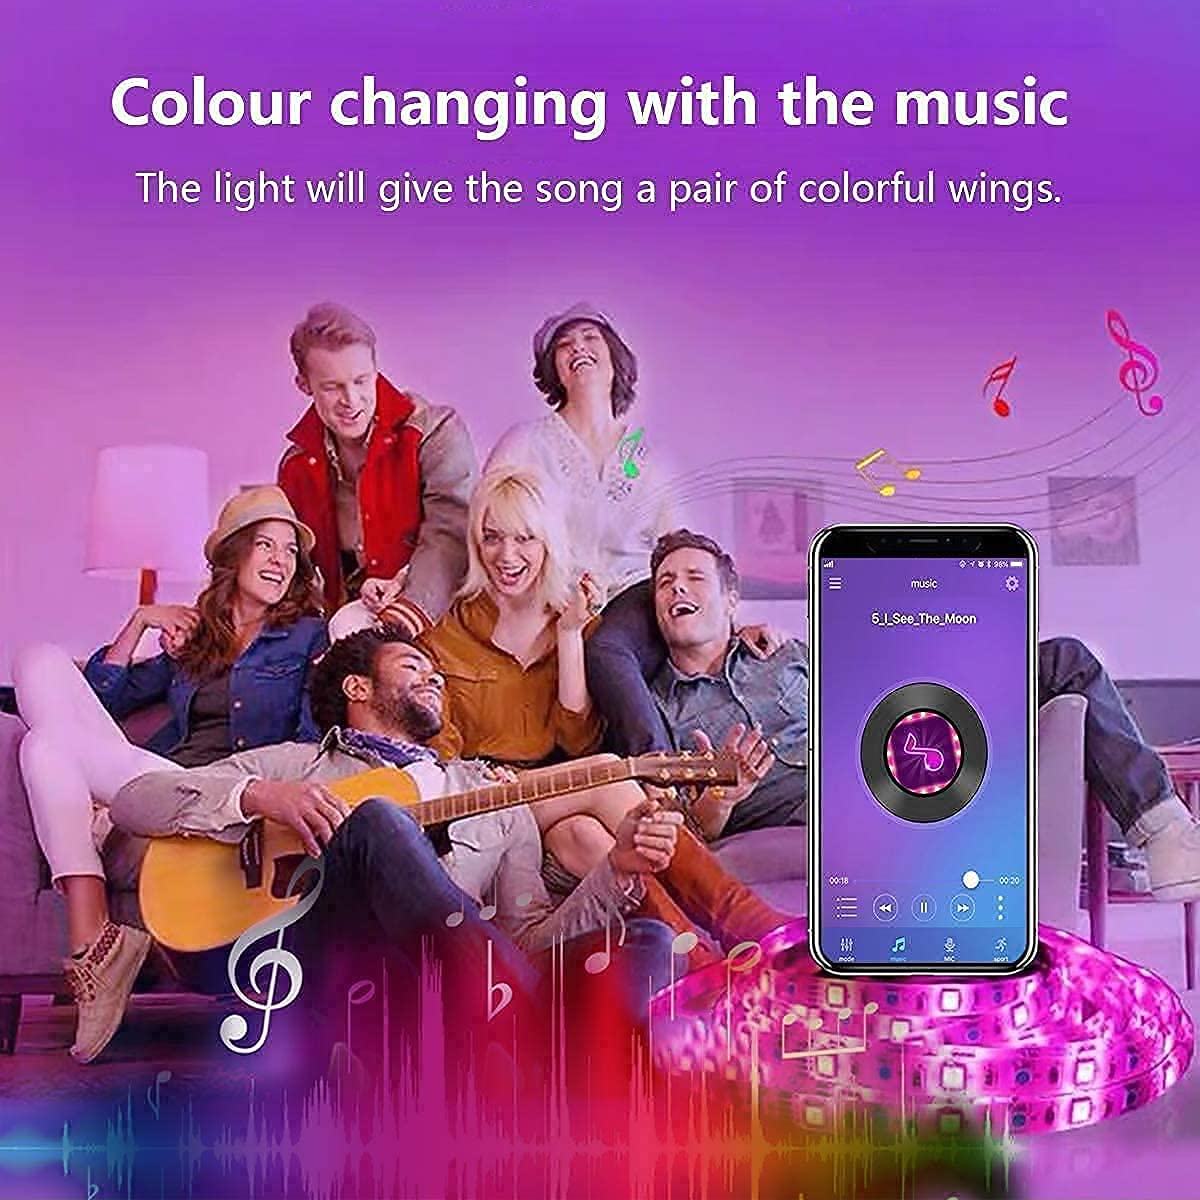 Led Lights, L8star 15m Smart Led Light 5050 Colorful RGB Led Strips Lights for Bedroom with Bluetooth and Remote Control Sync to Music Apply for Home Decoration